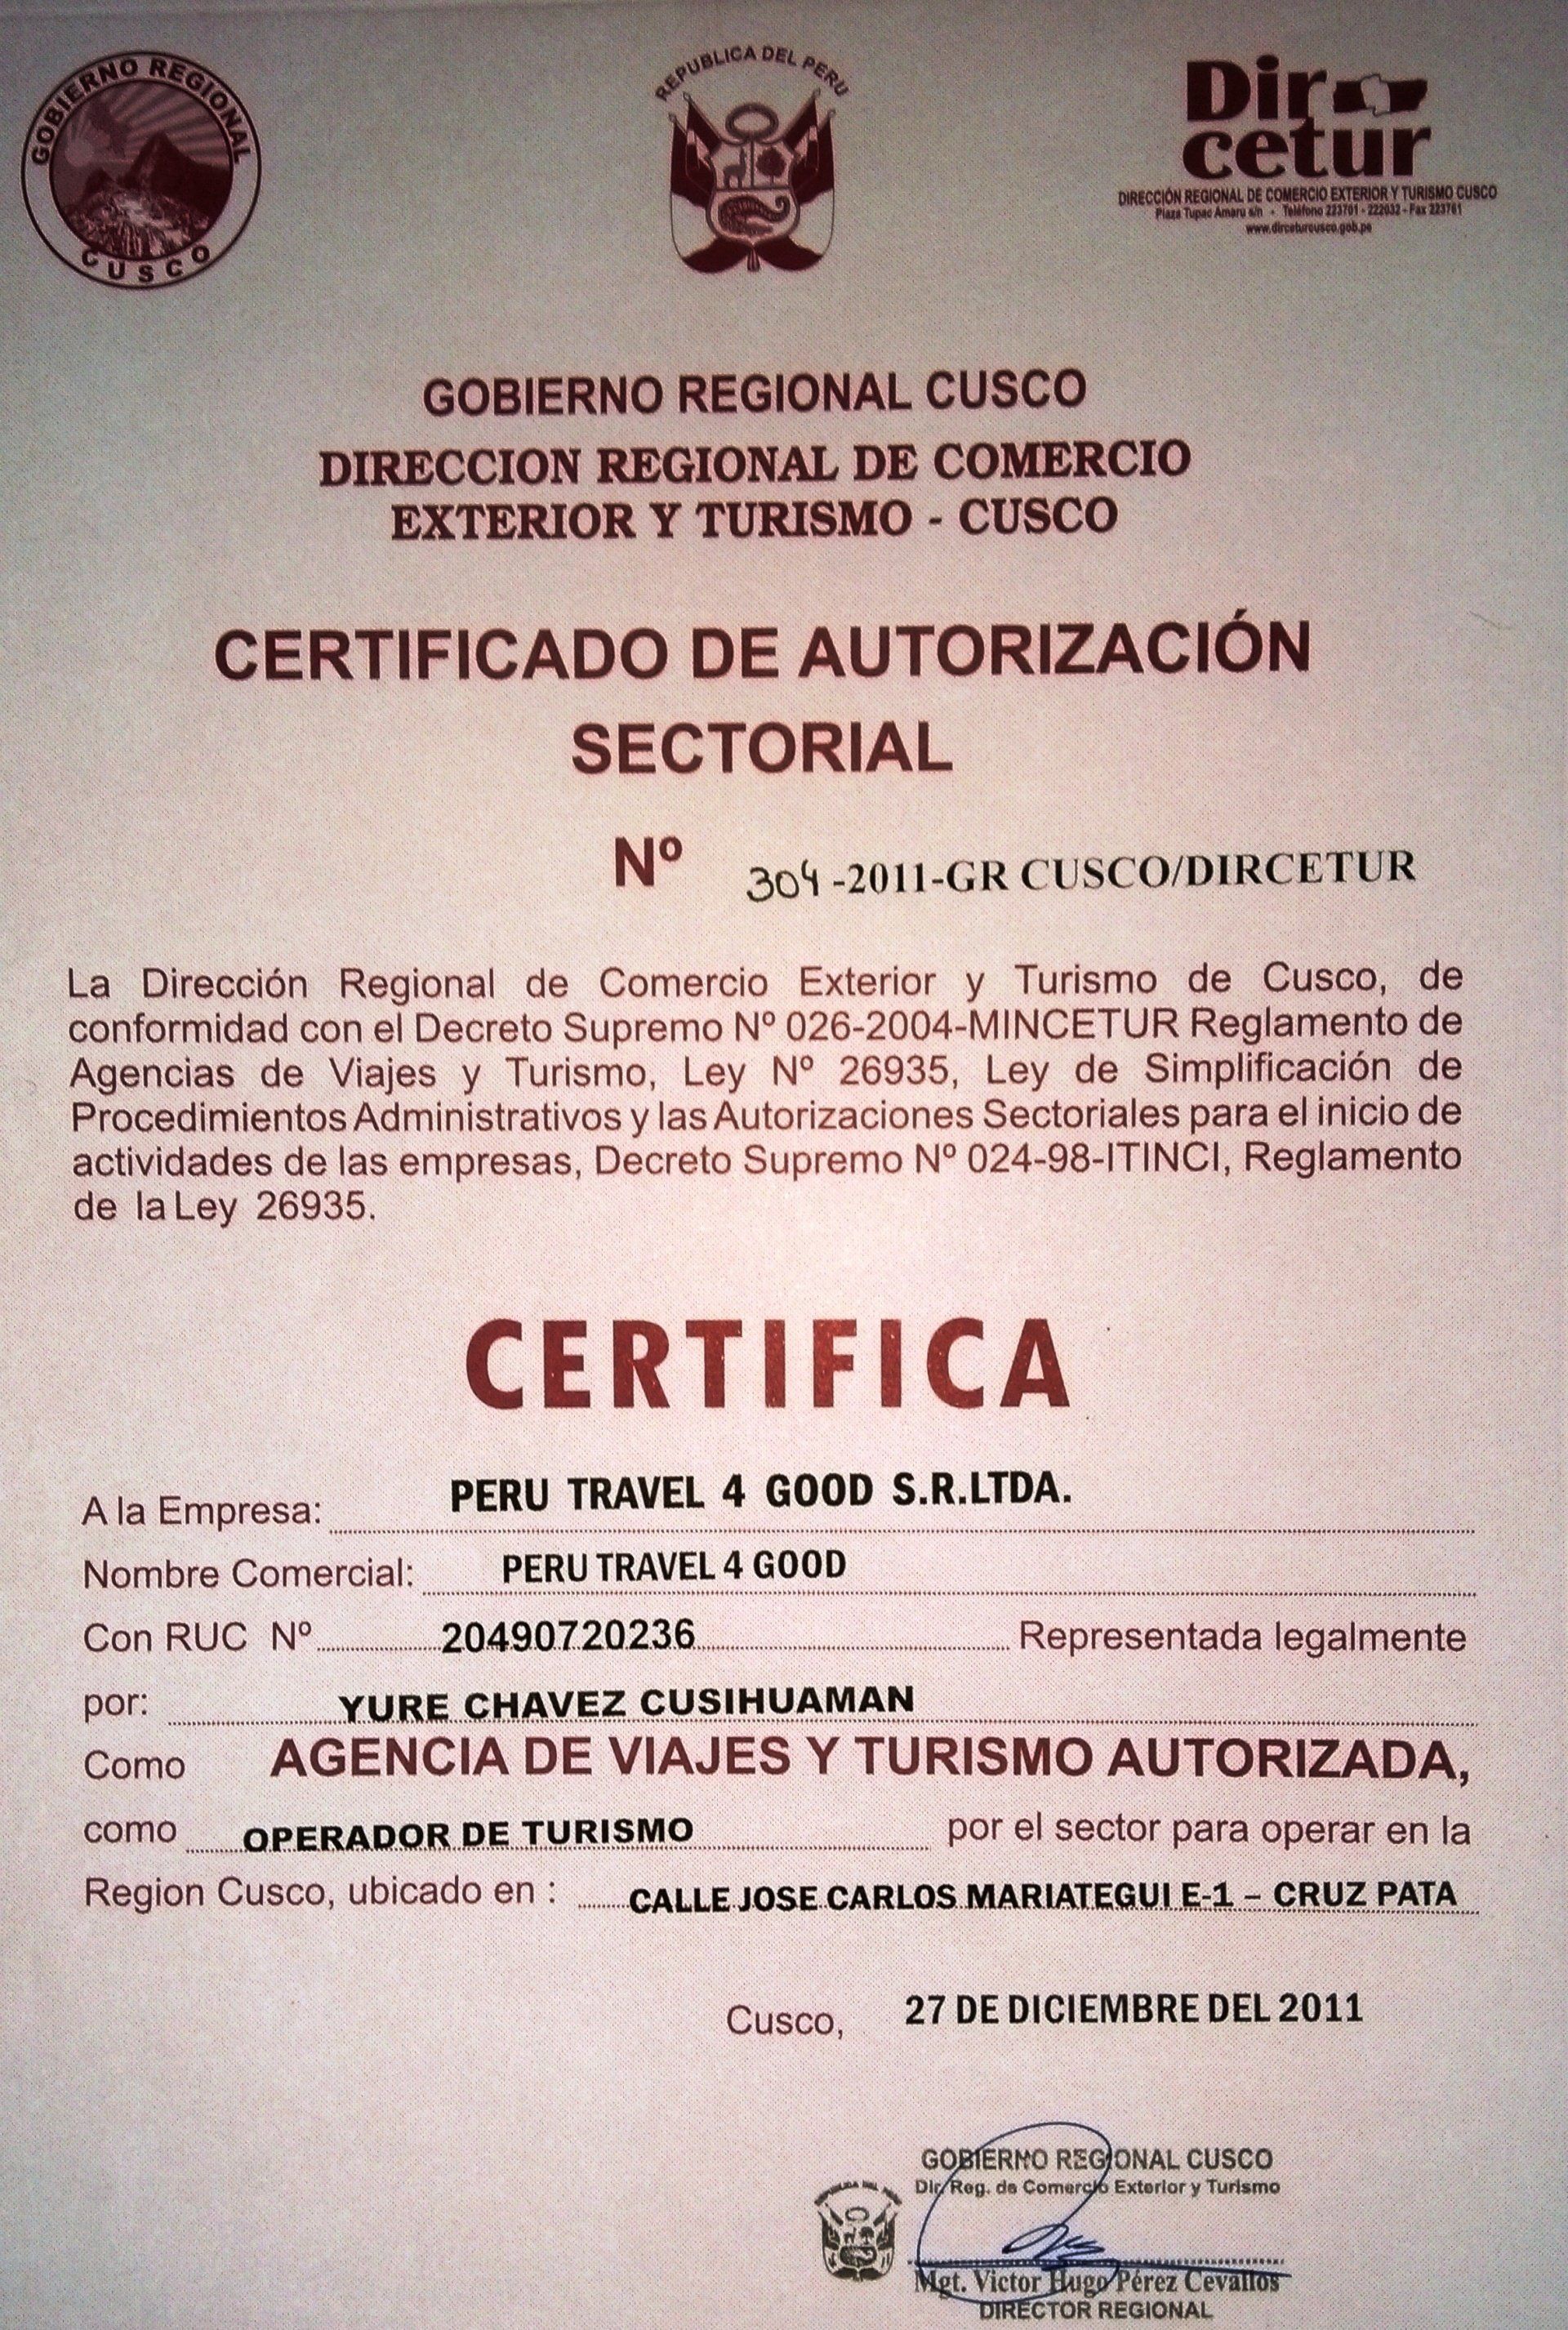 National Certification